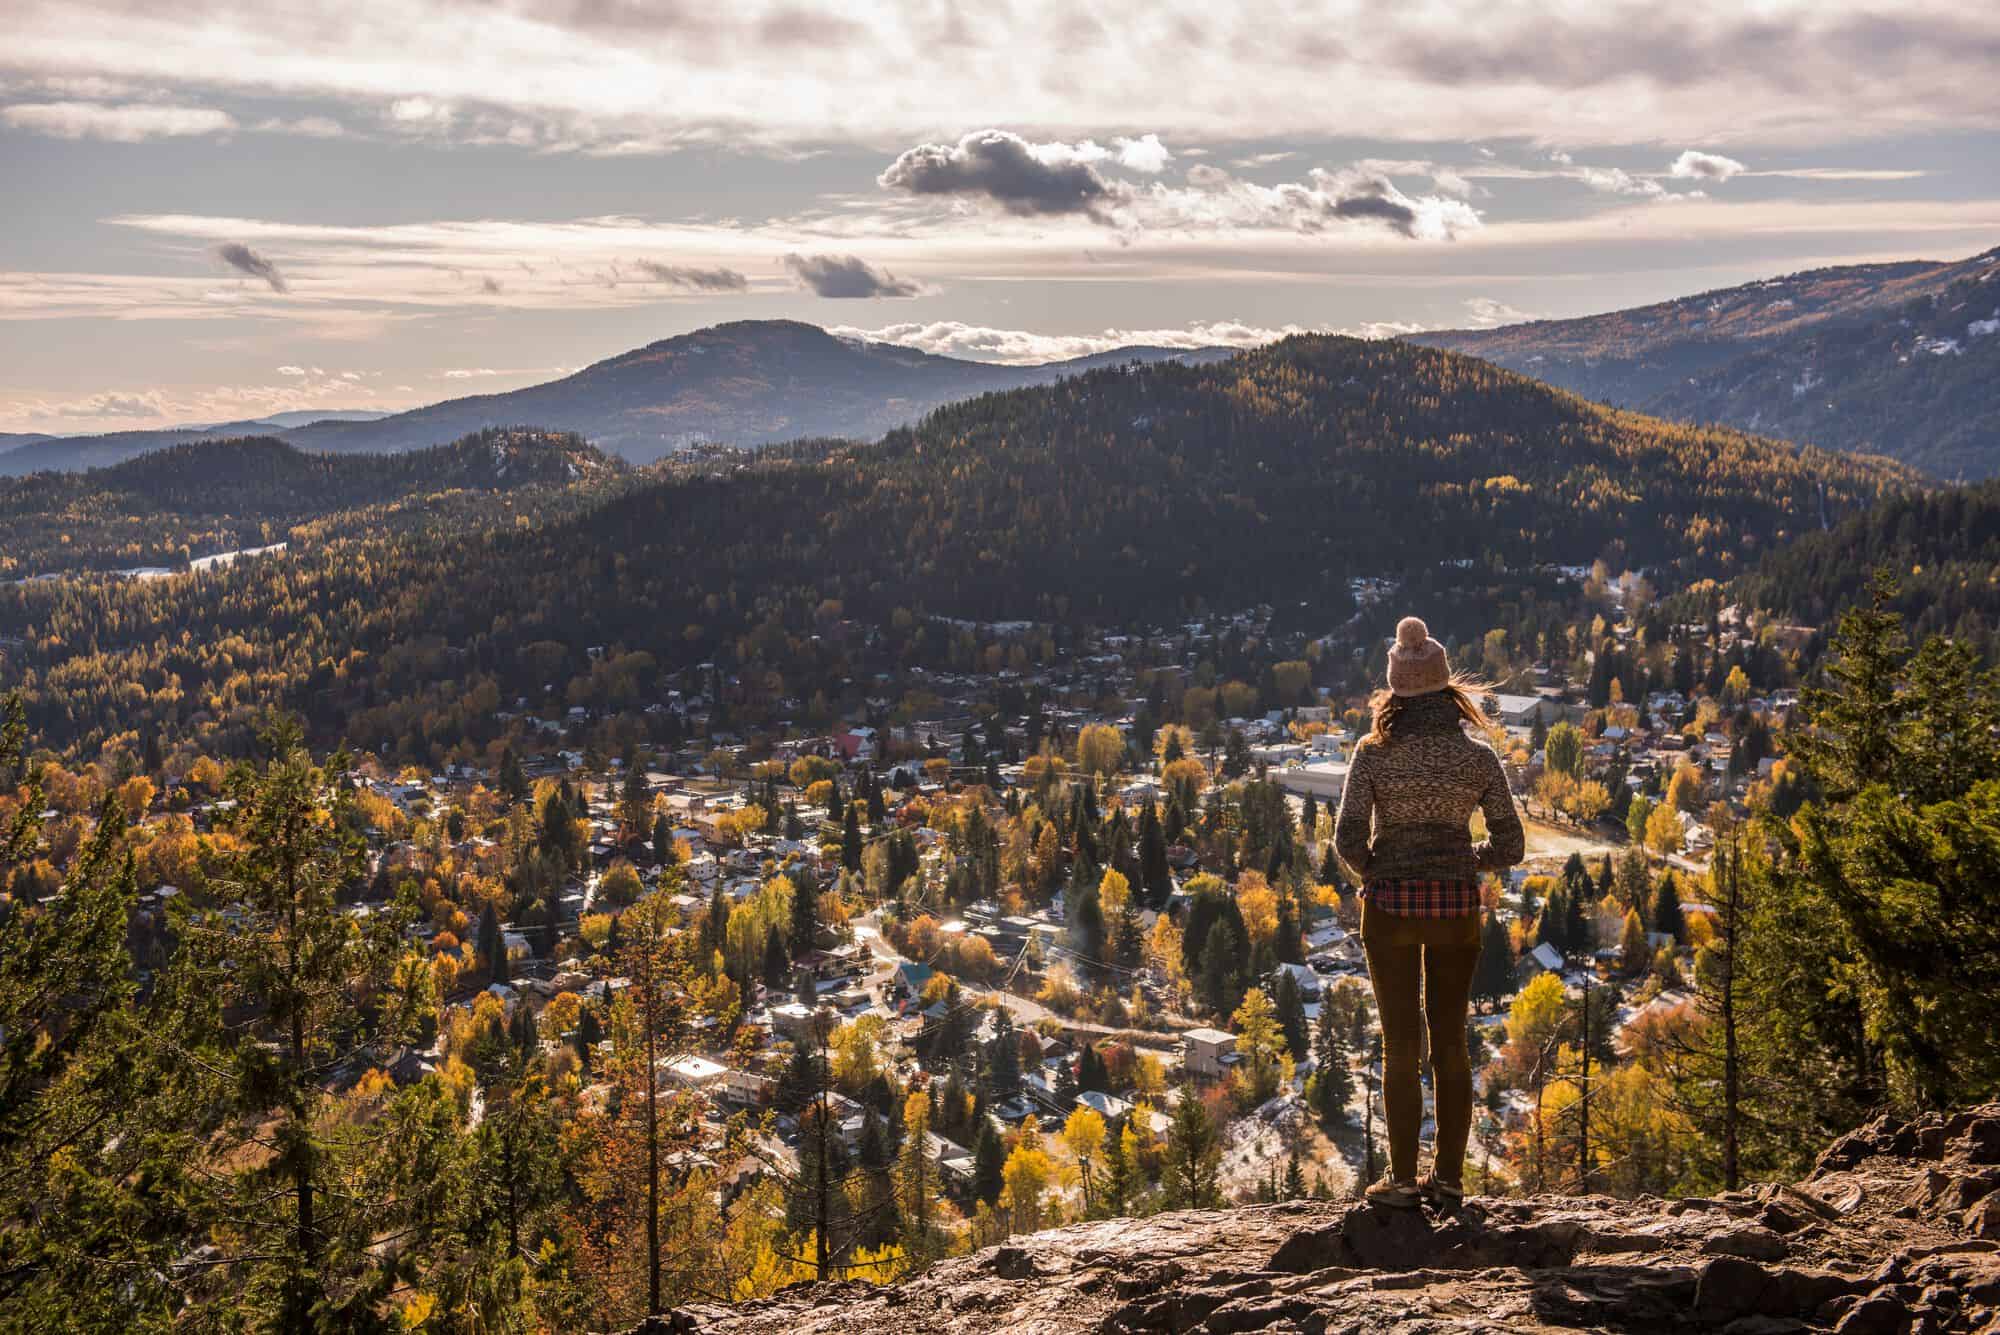 A view of Rossland, BC from the Kootenay Columbia viewpoint